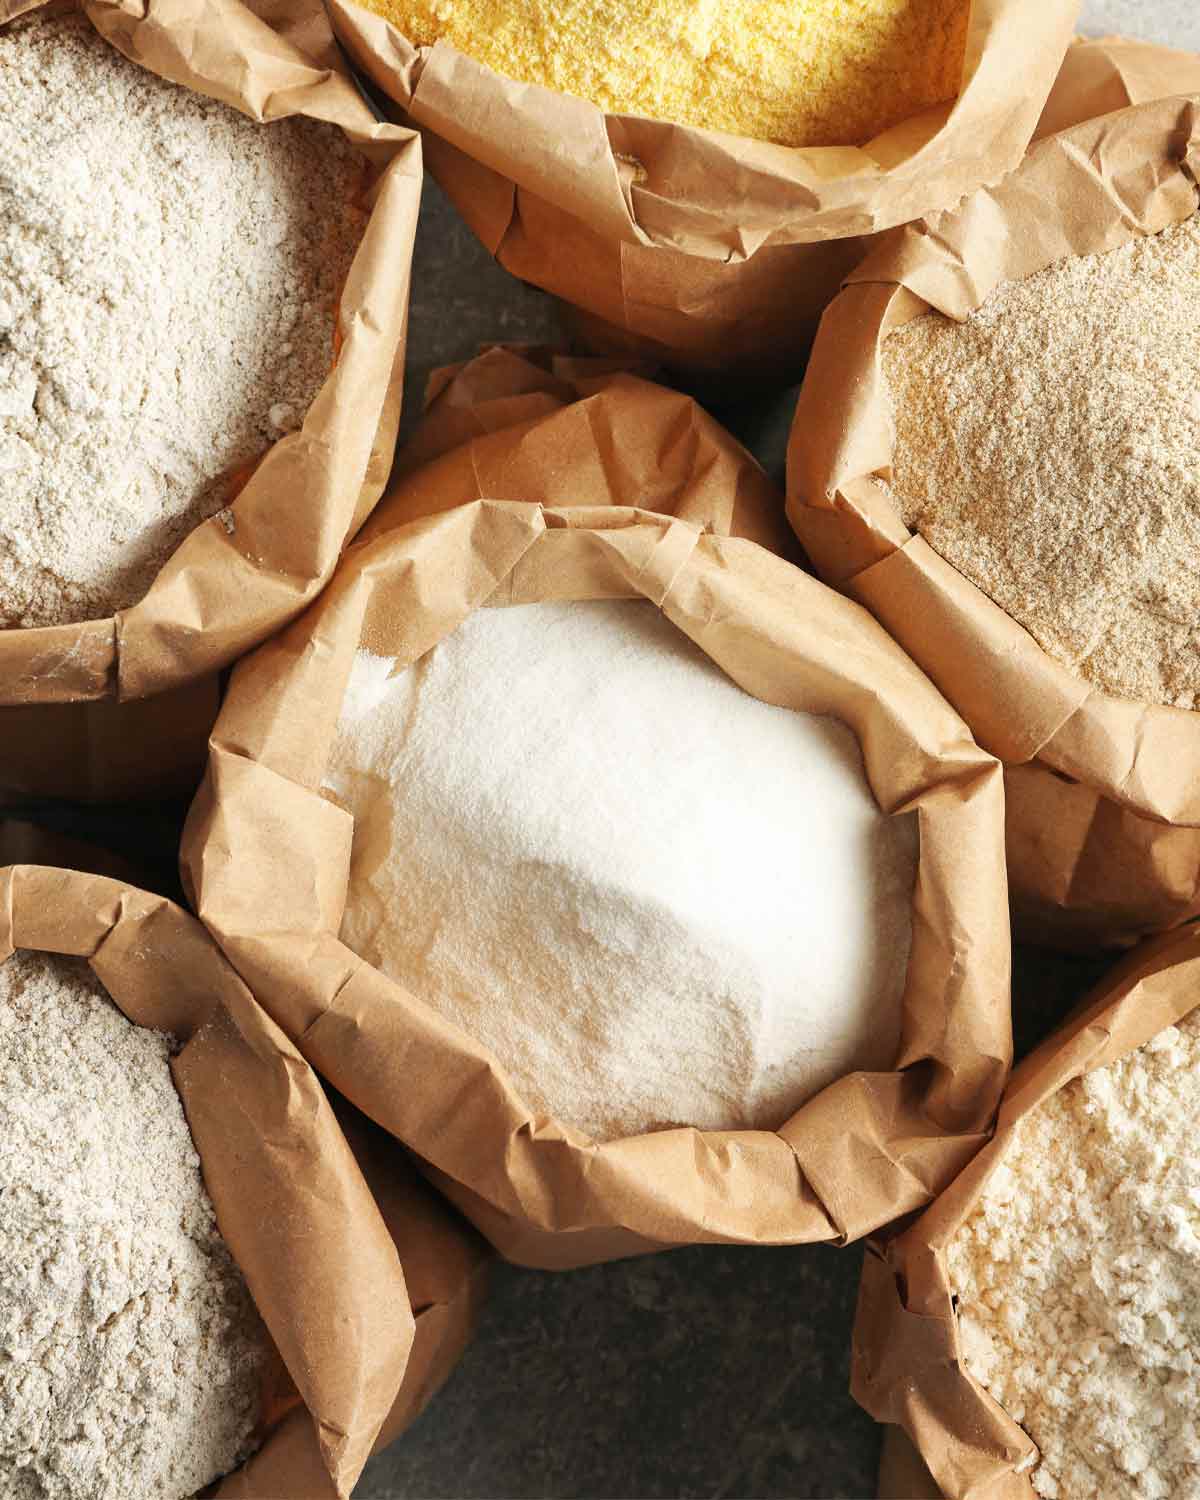 Open bags of different types of flours.